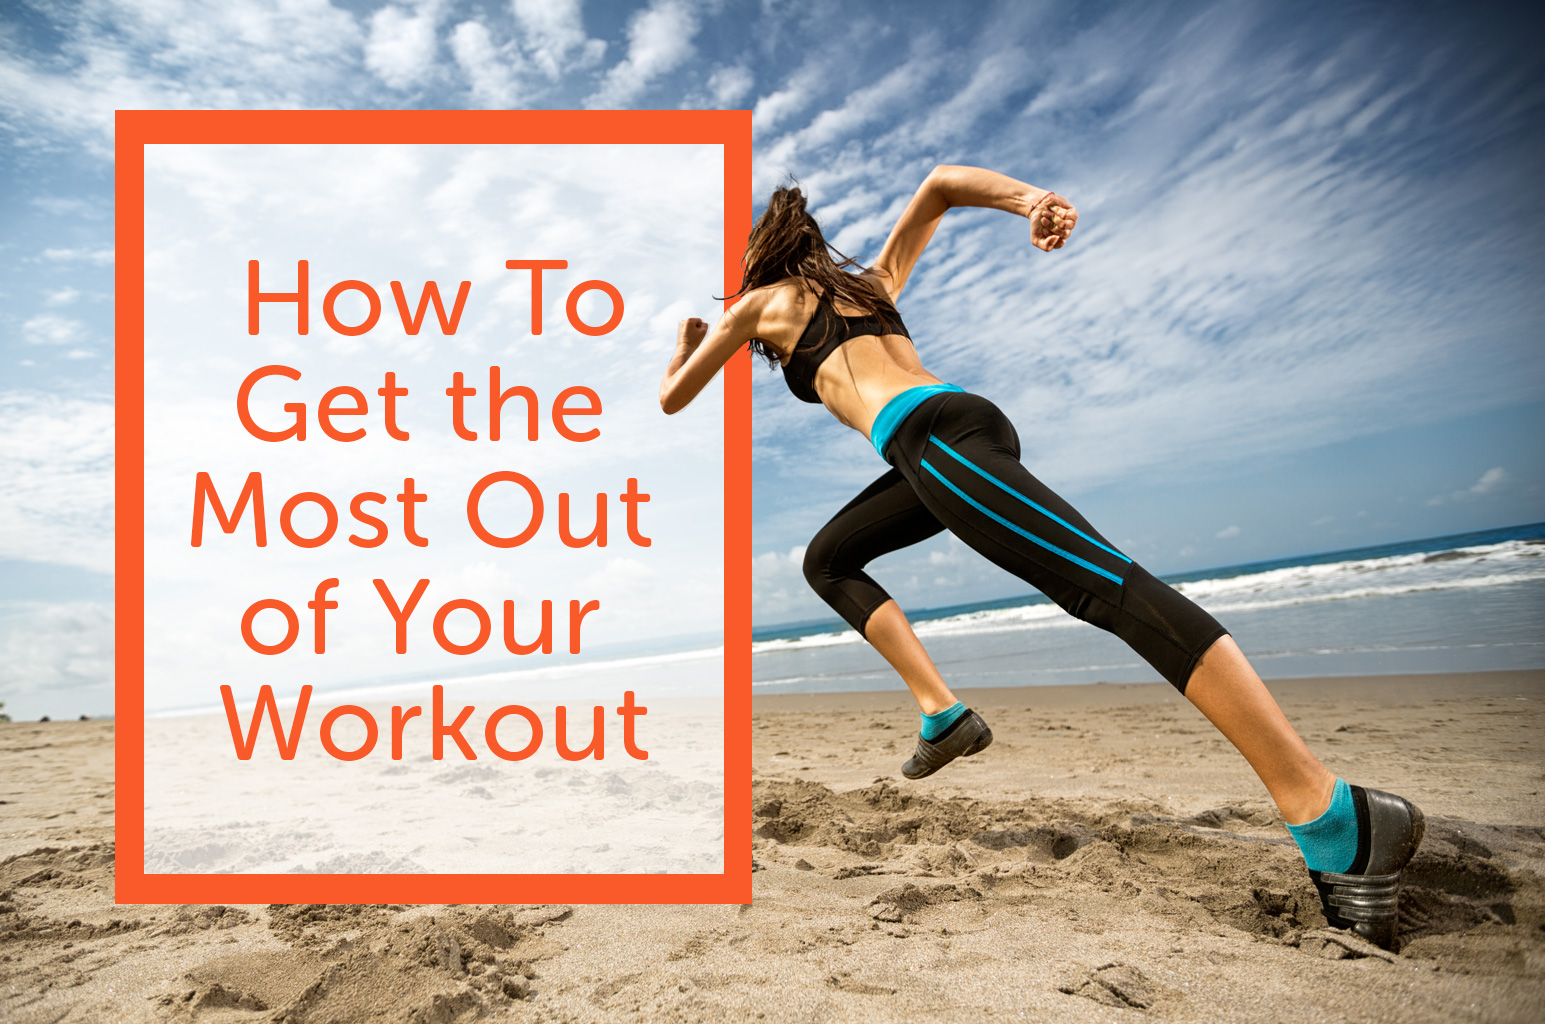 Get the Most Out of Your Workout